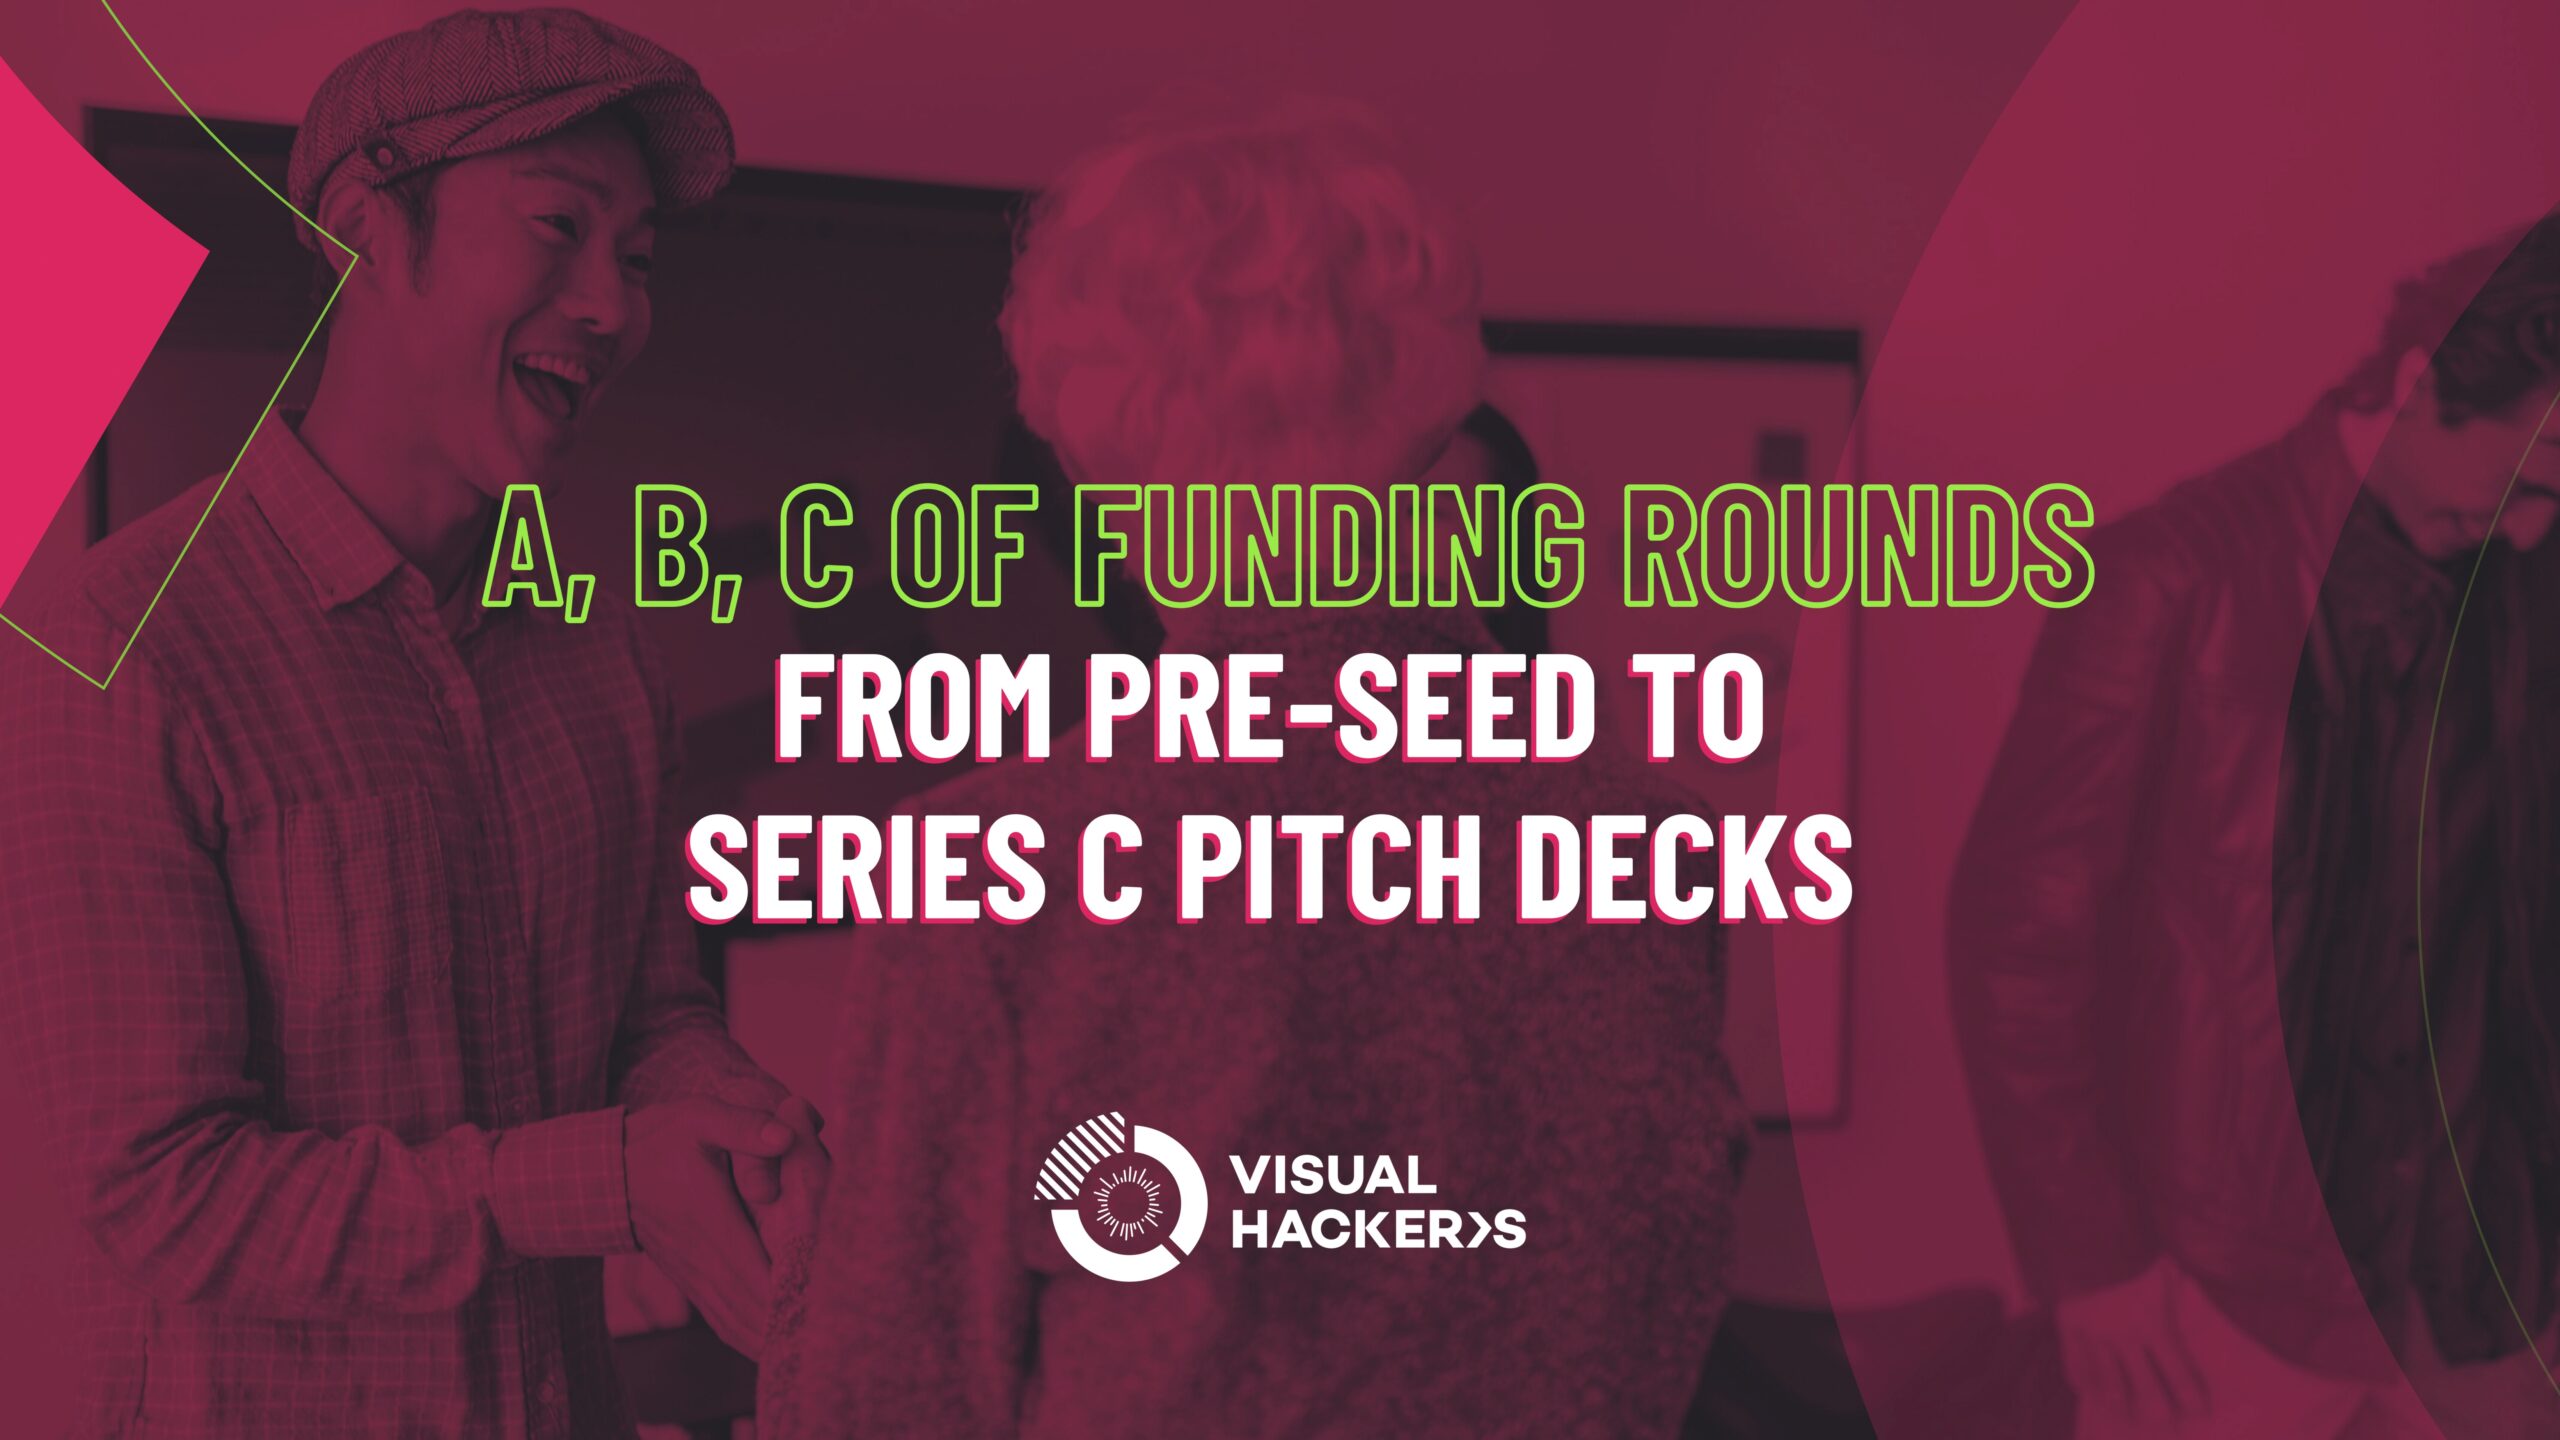 Featured image for “A, B, C of funding rounds. From pre-seed to Series C pitch decks”